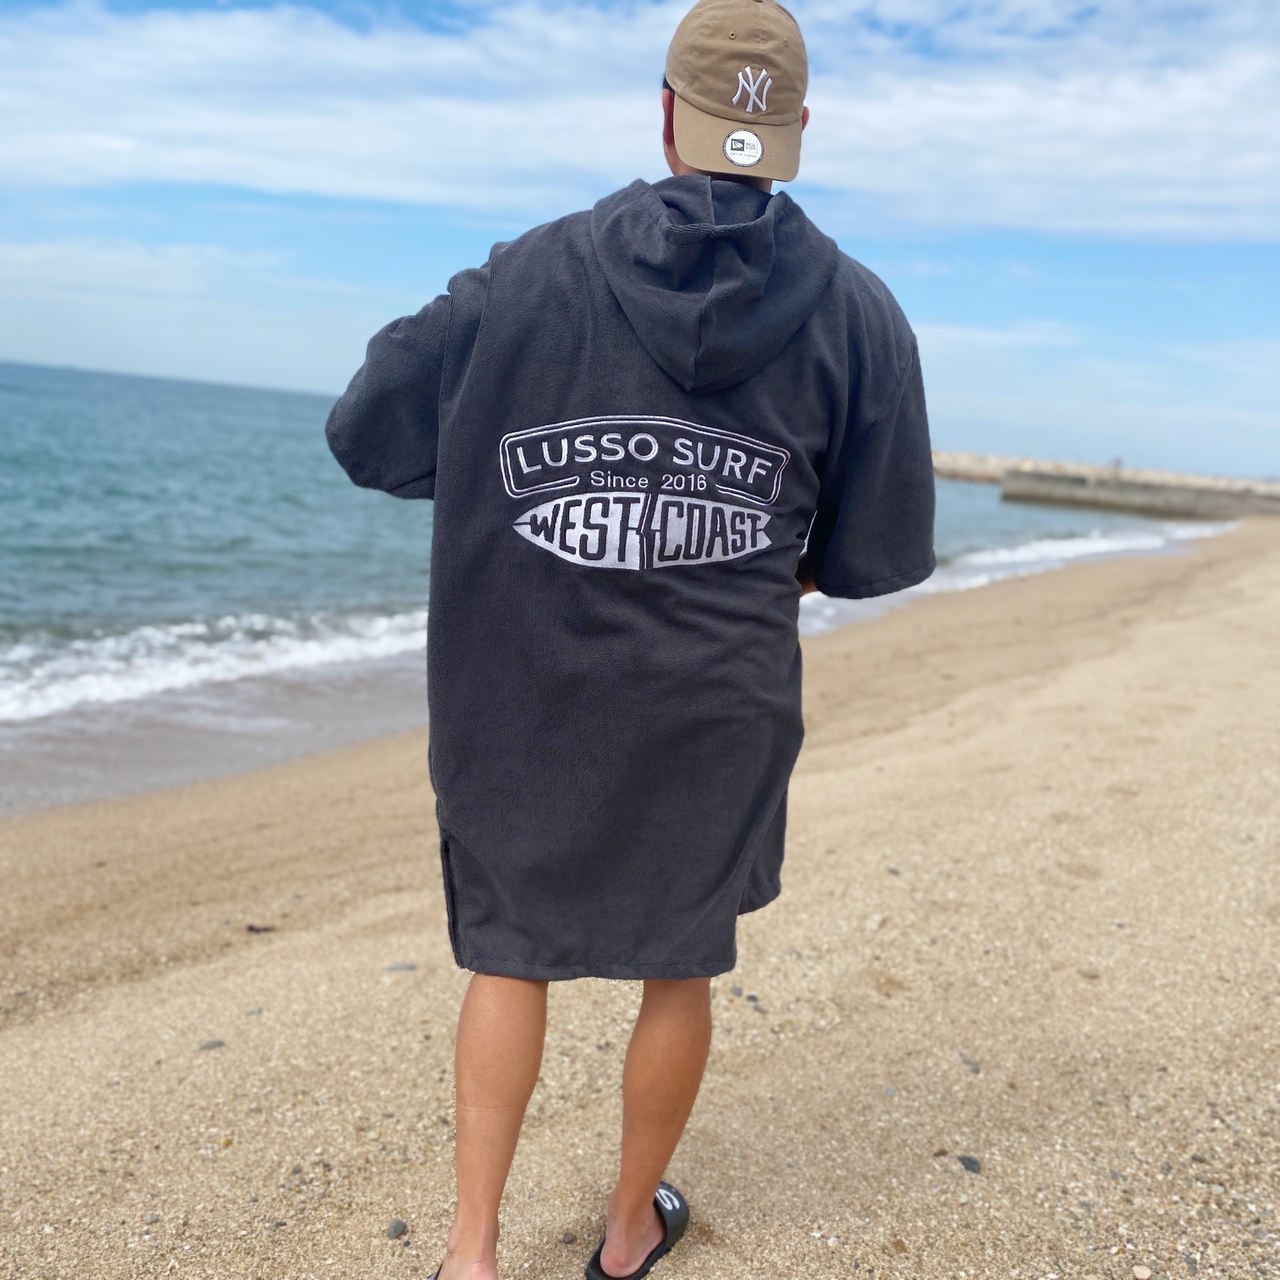 SURF BUS Embroidery Poncho 発売中！